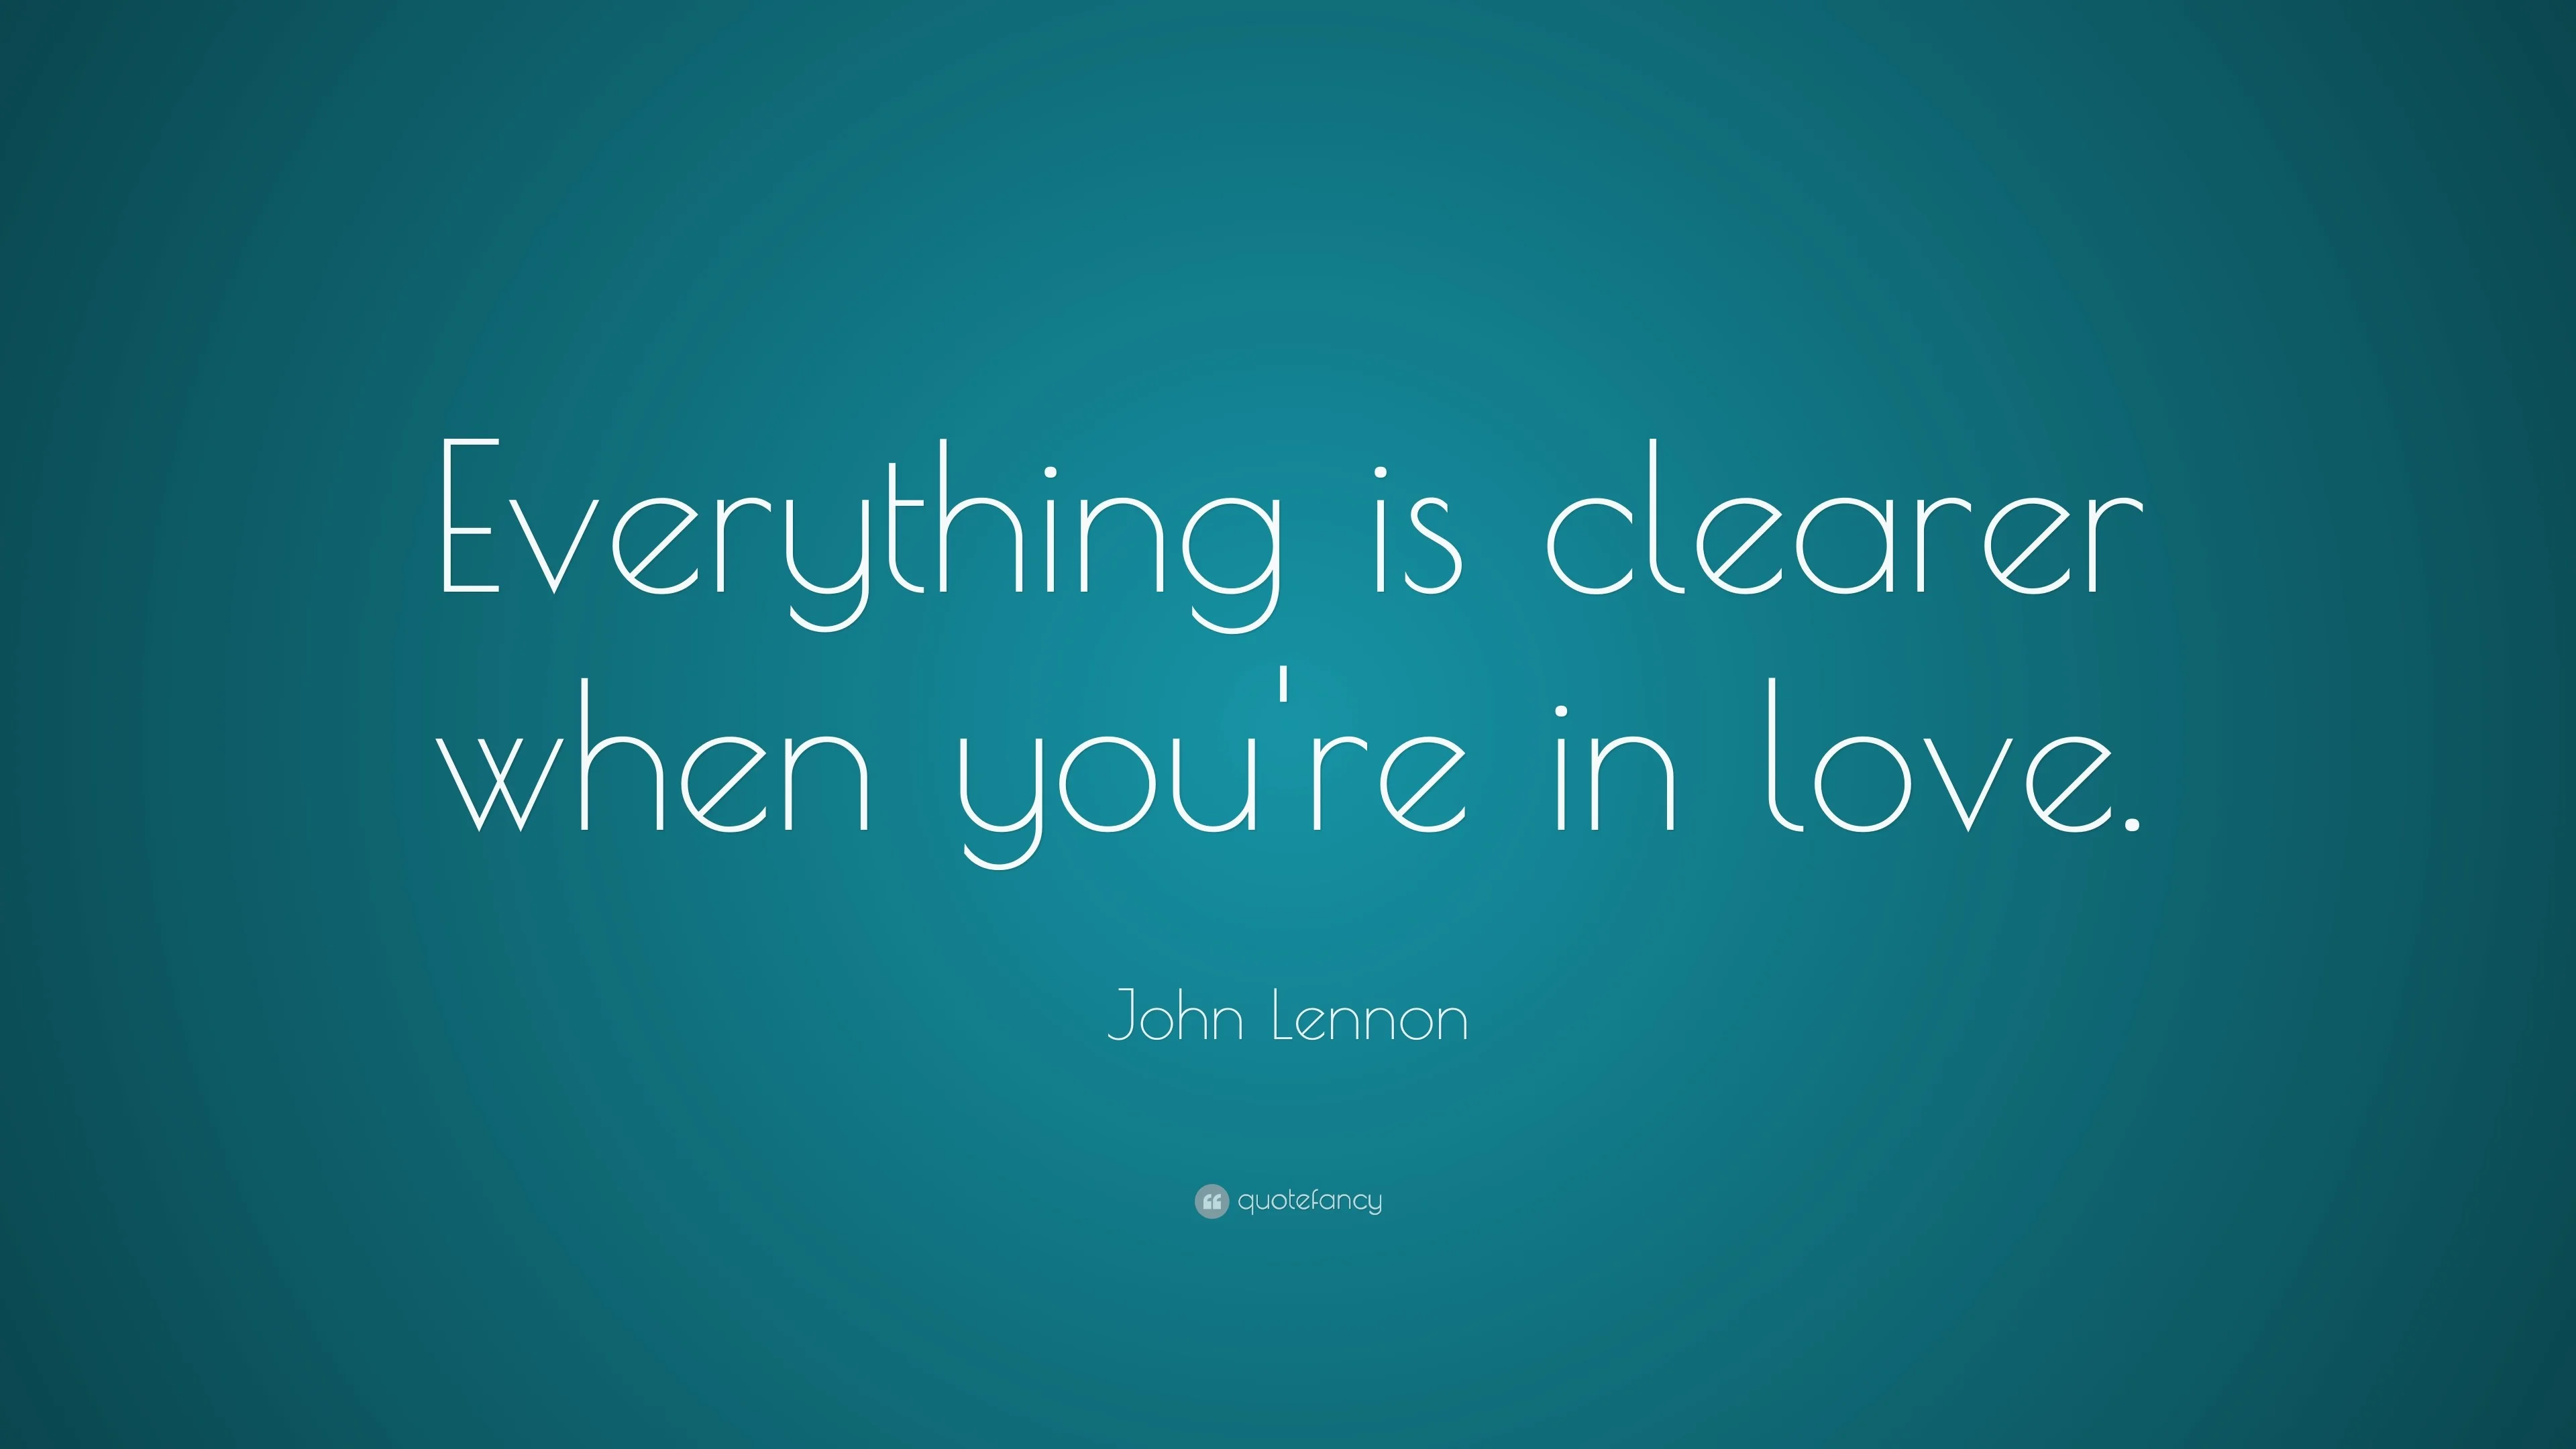 John Lennon Quotes (15 wallpapers) – Quotefancy